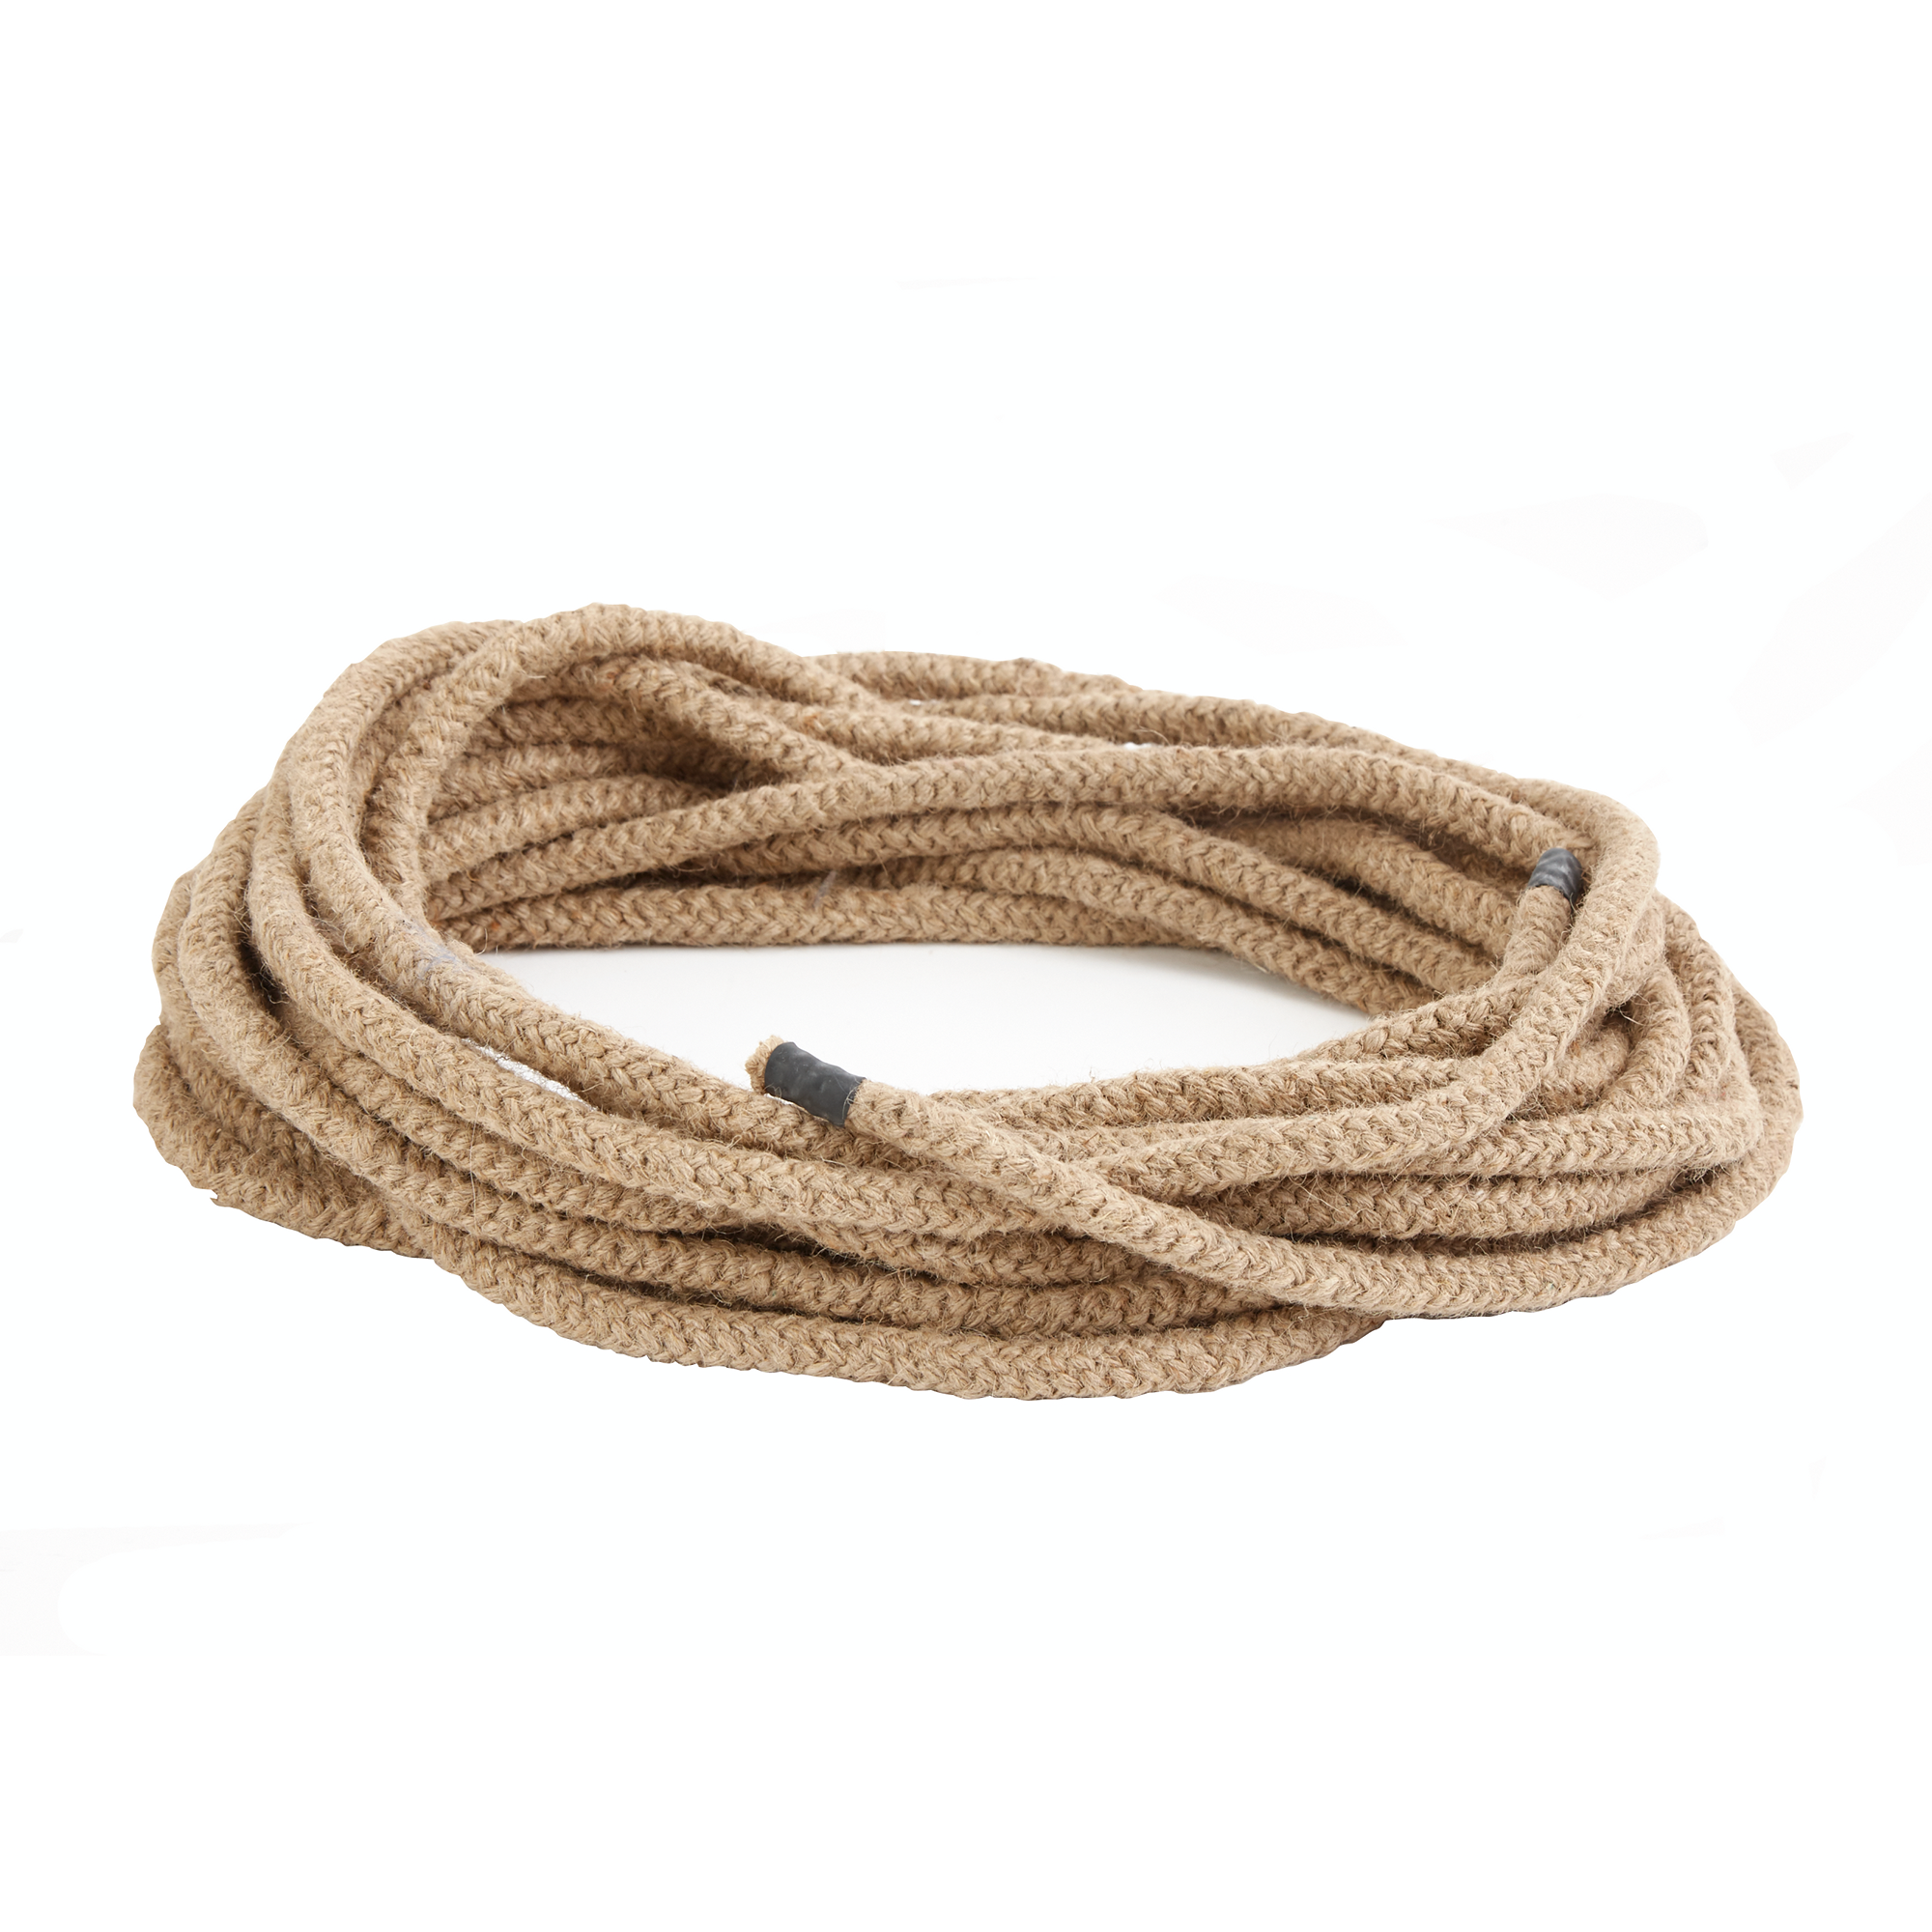 PPEP07406 - Plaited Skipping Rope - Jute - 41ft